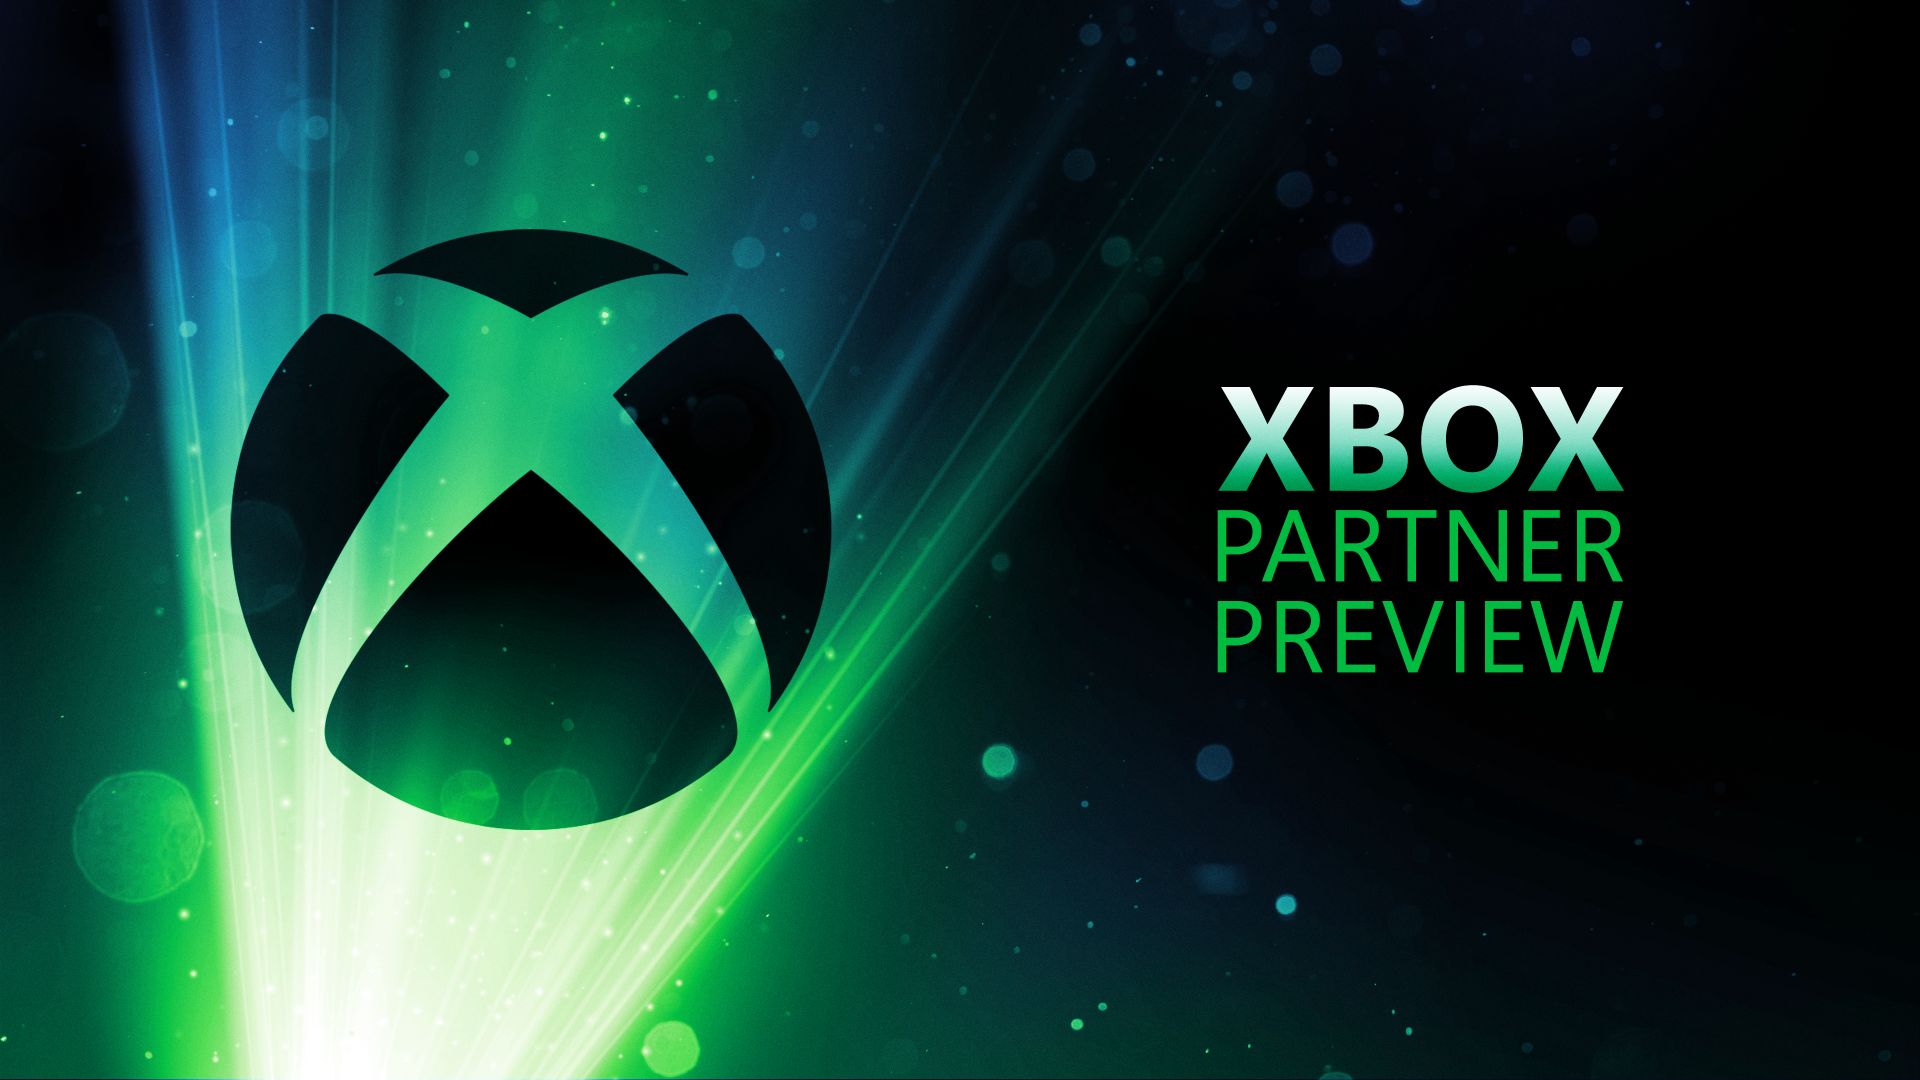 Xbox Partner Preview: Every Announcement and Trailer From Our Third-Party Partners